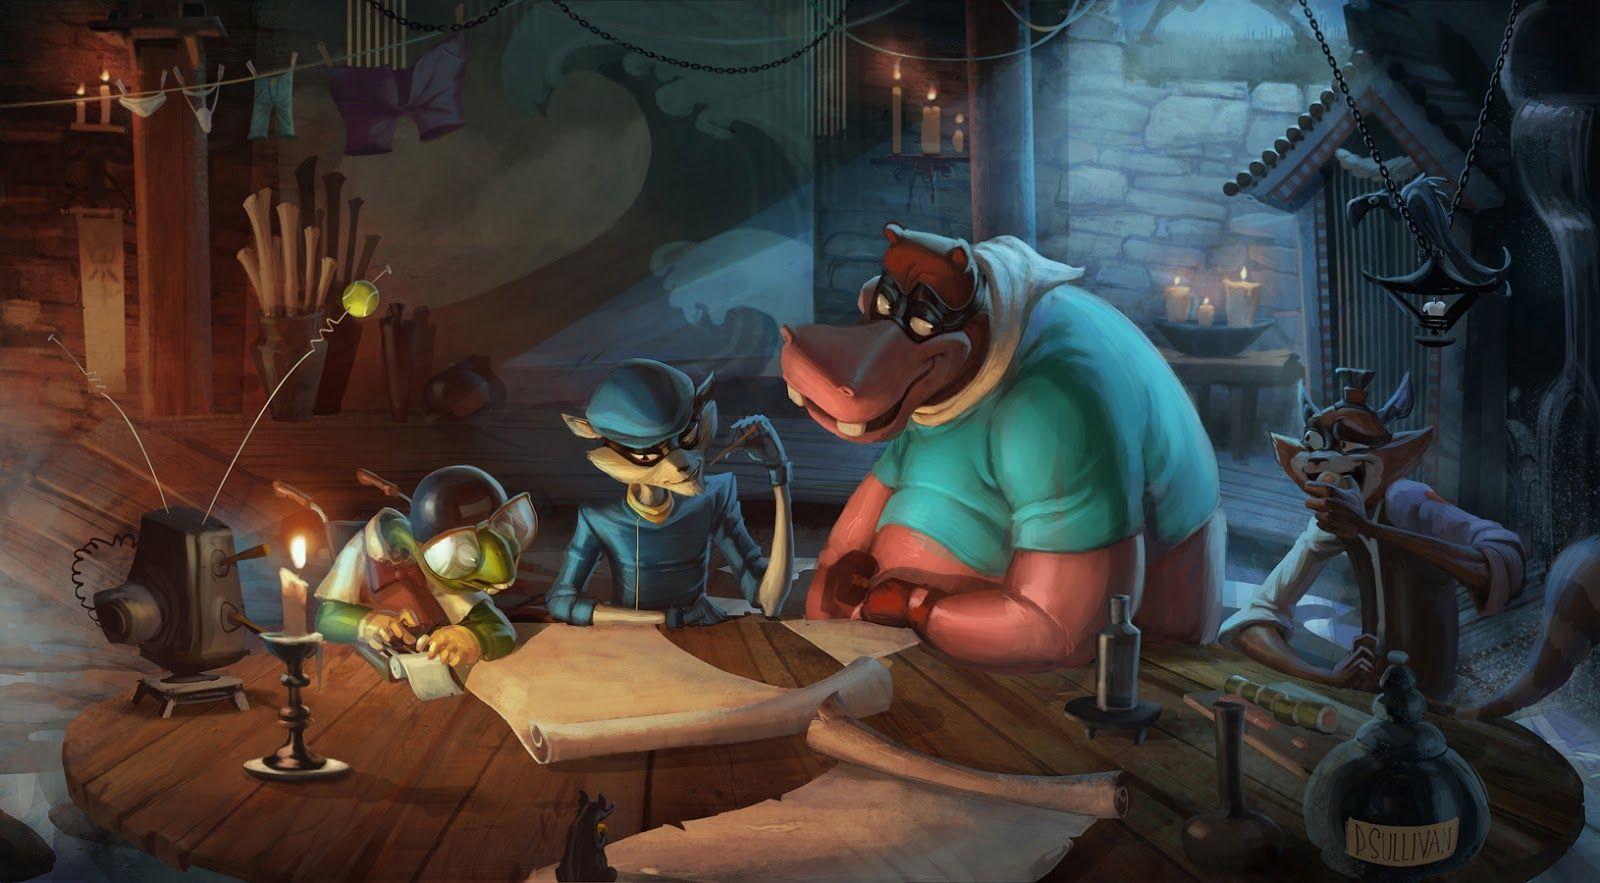 Sly Cooper: Thieves in Time concept art by Paul Sullivan. Game Art